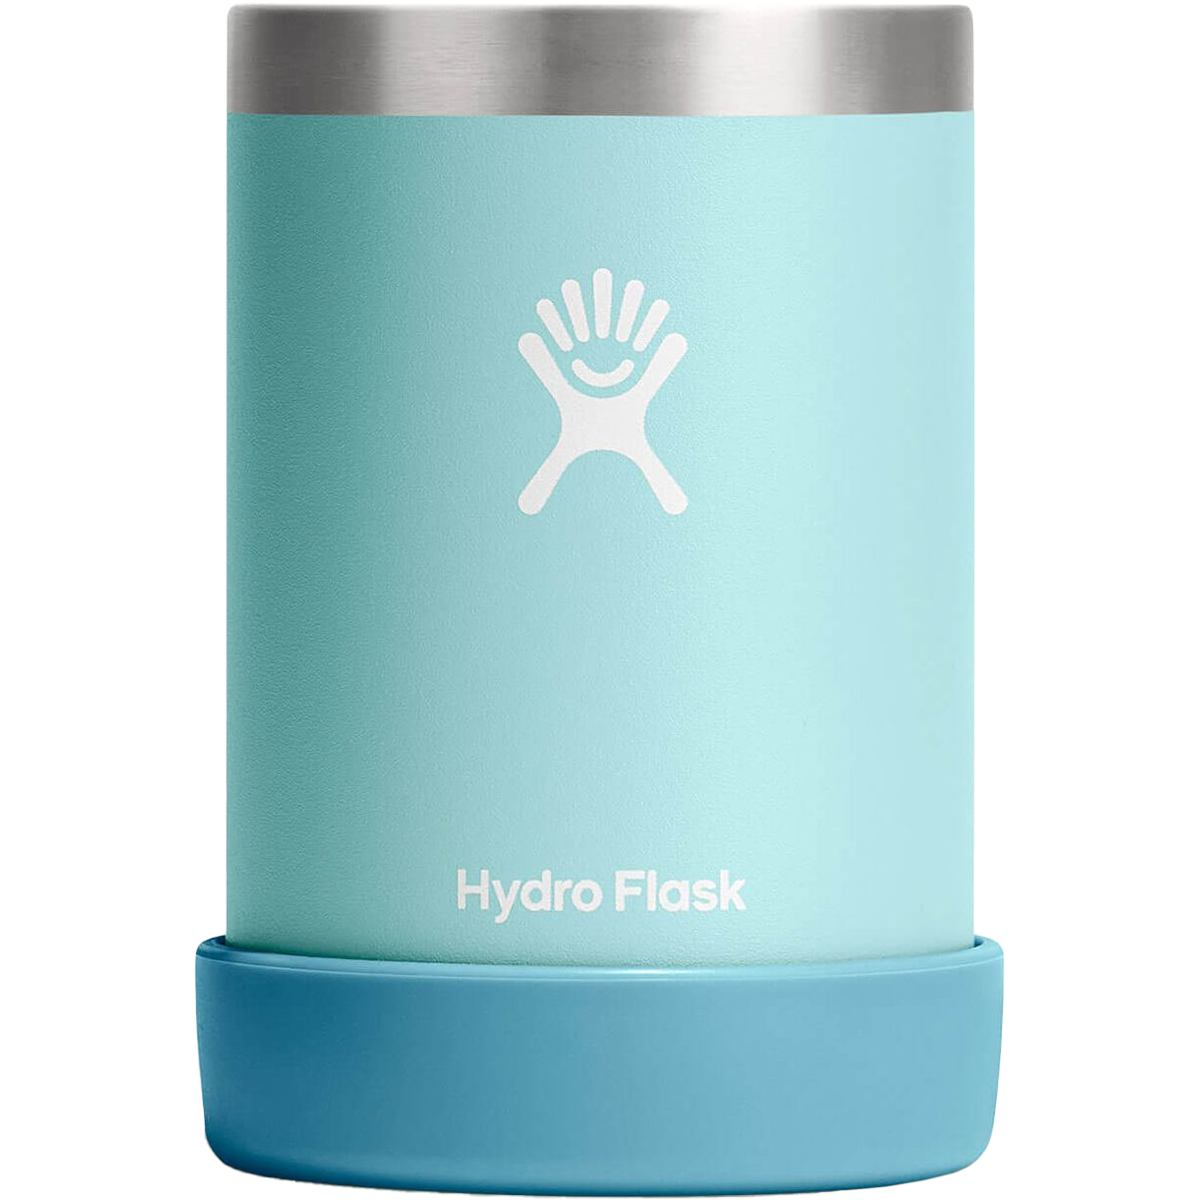 Hydro Flask 10 oz Wine Tumbler with Lid Teal